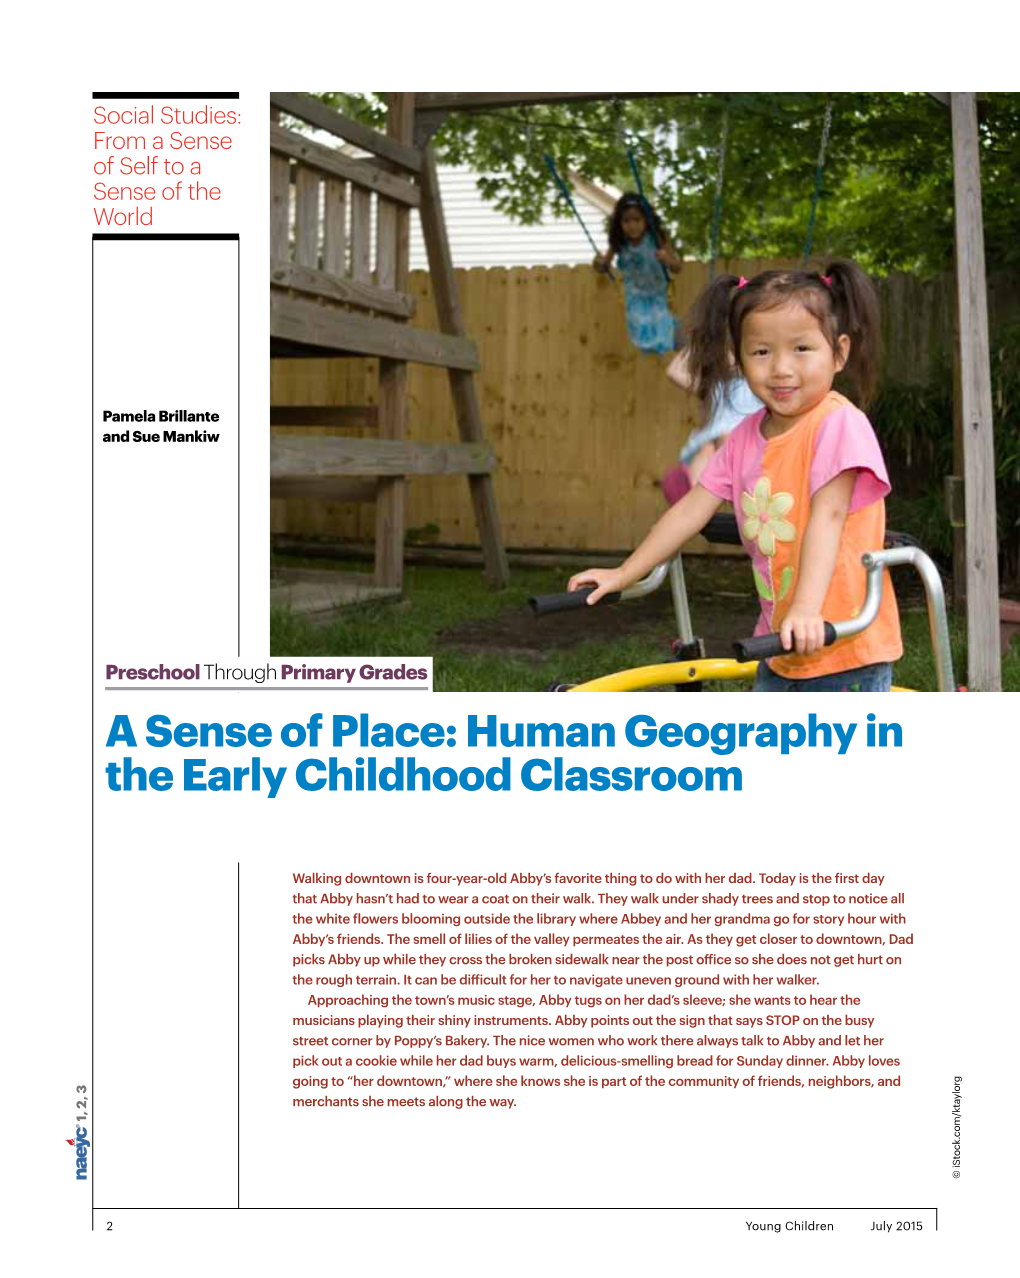 A Sense of Place: Human Geography in the Early Childhood Classroom